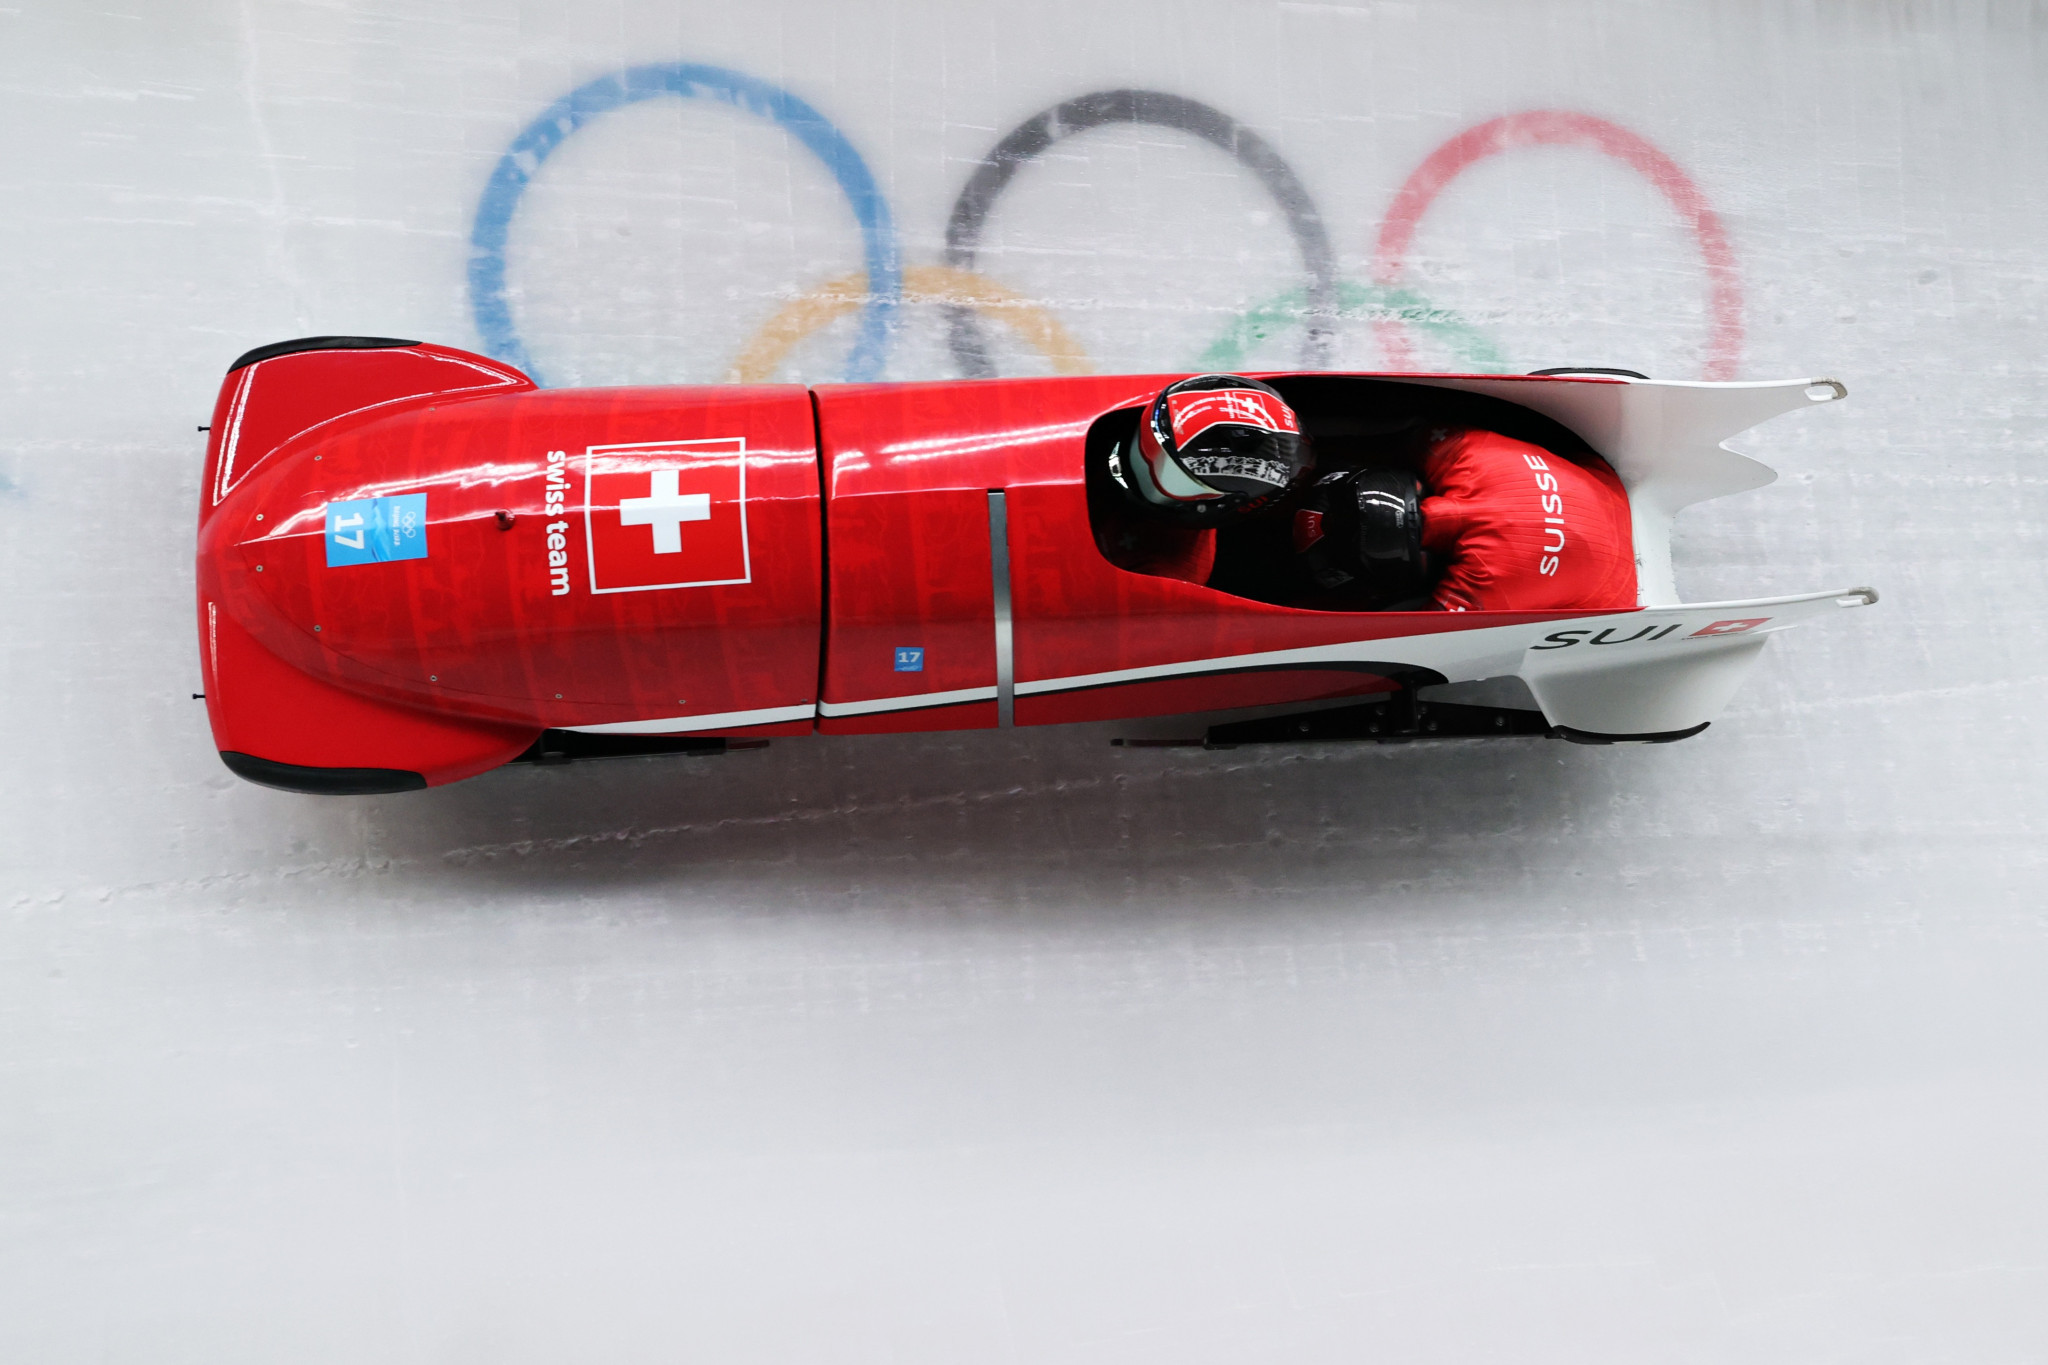 This year's International Bobsleigh and Skeleton Federation World Championships is set to be held in Switzerland, which Swiss Olympic claims boosts its status as a 